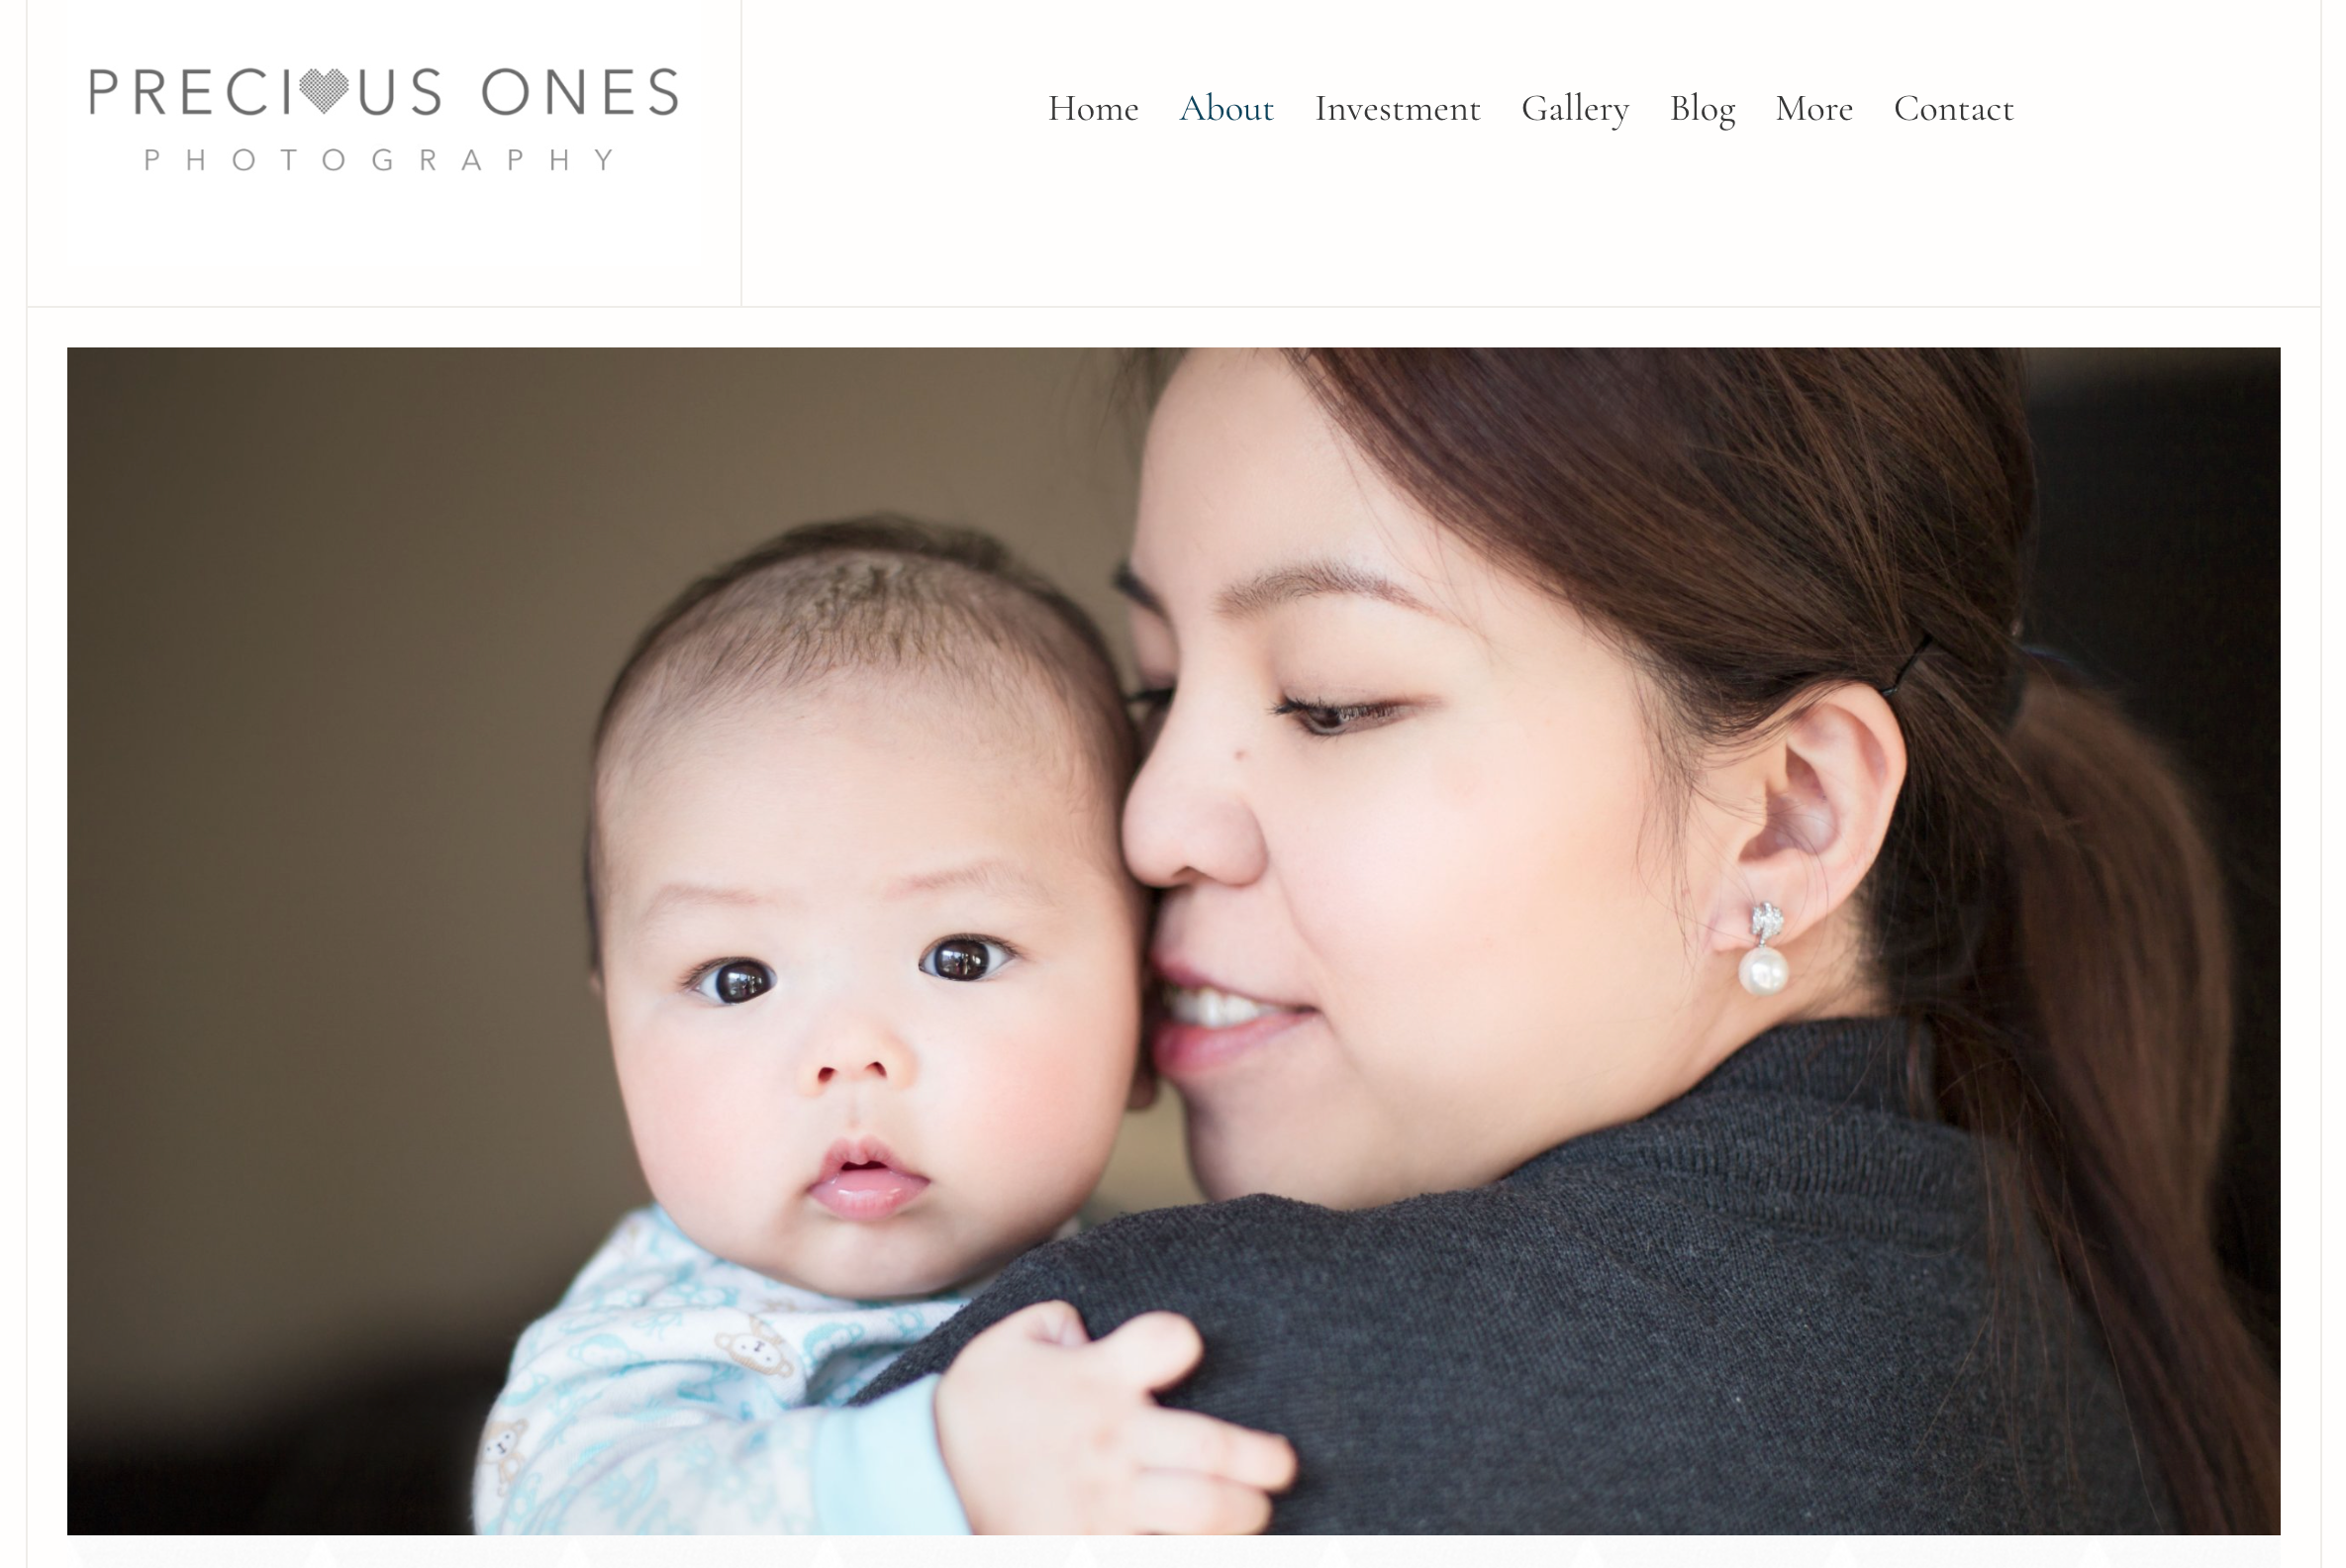 Website featuring a photo of a mom and baby